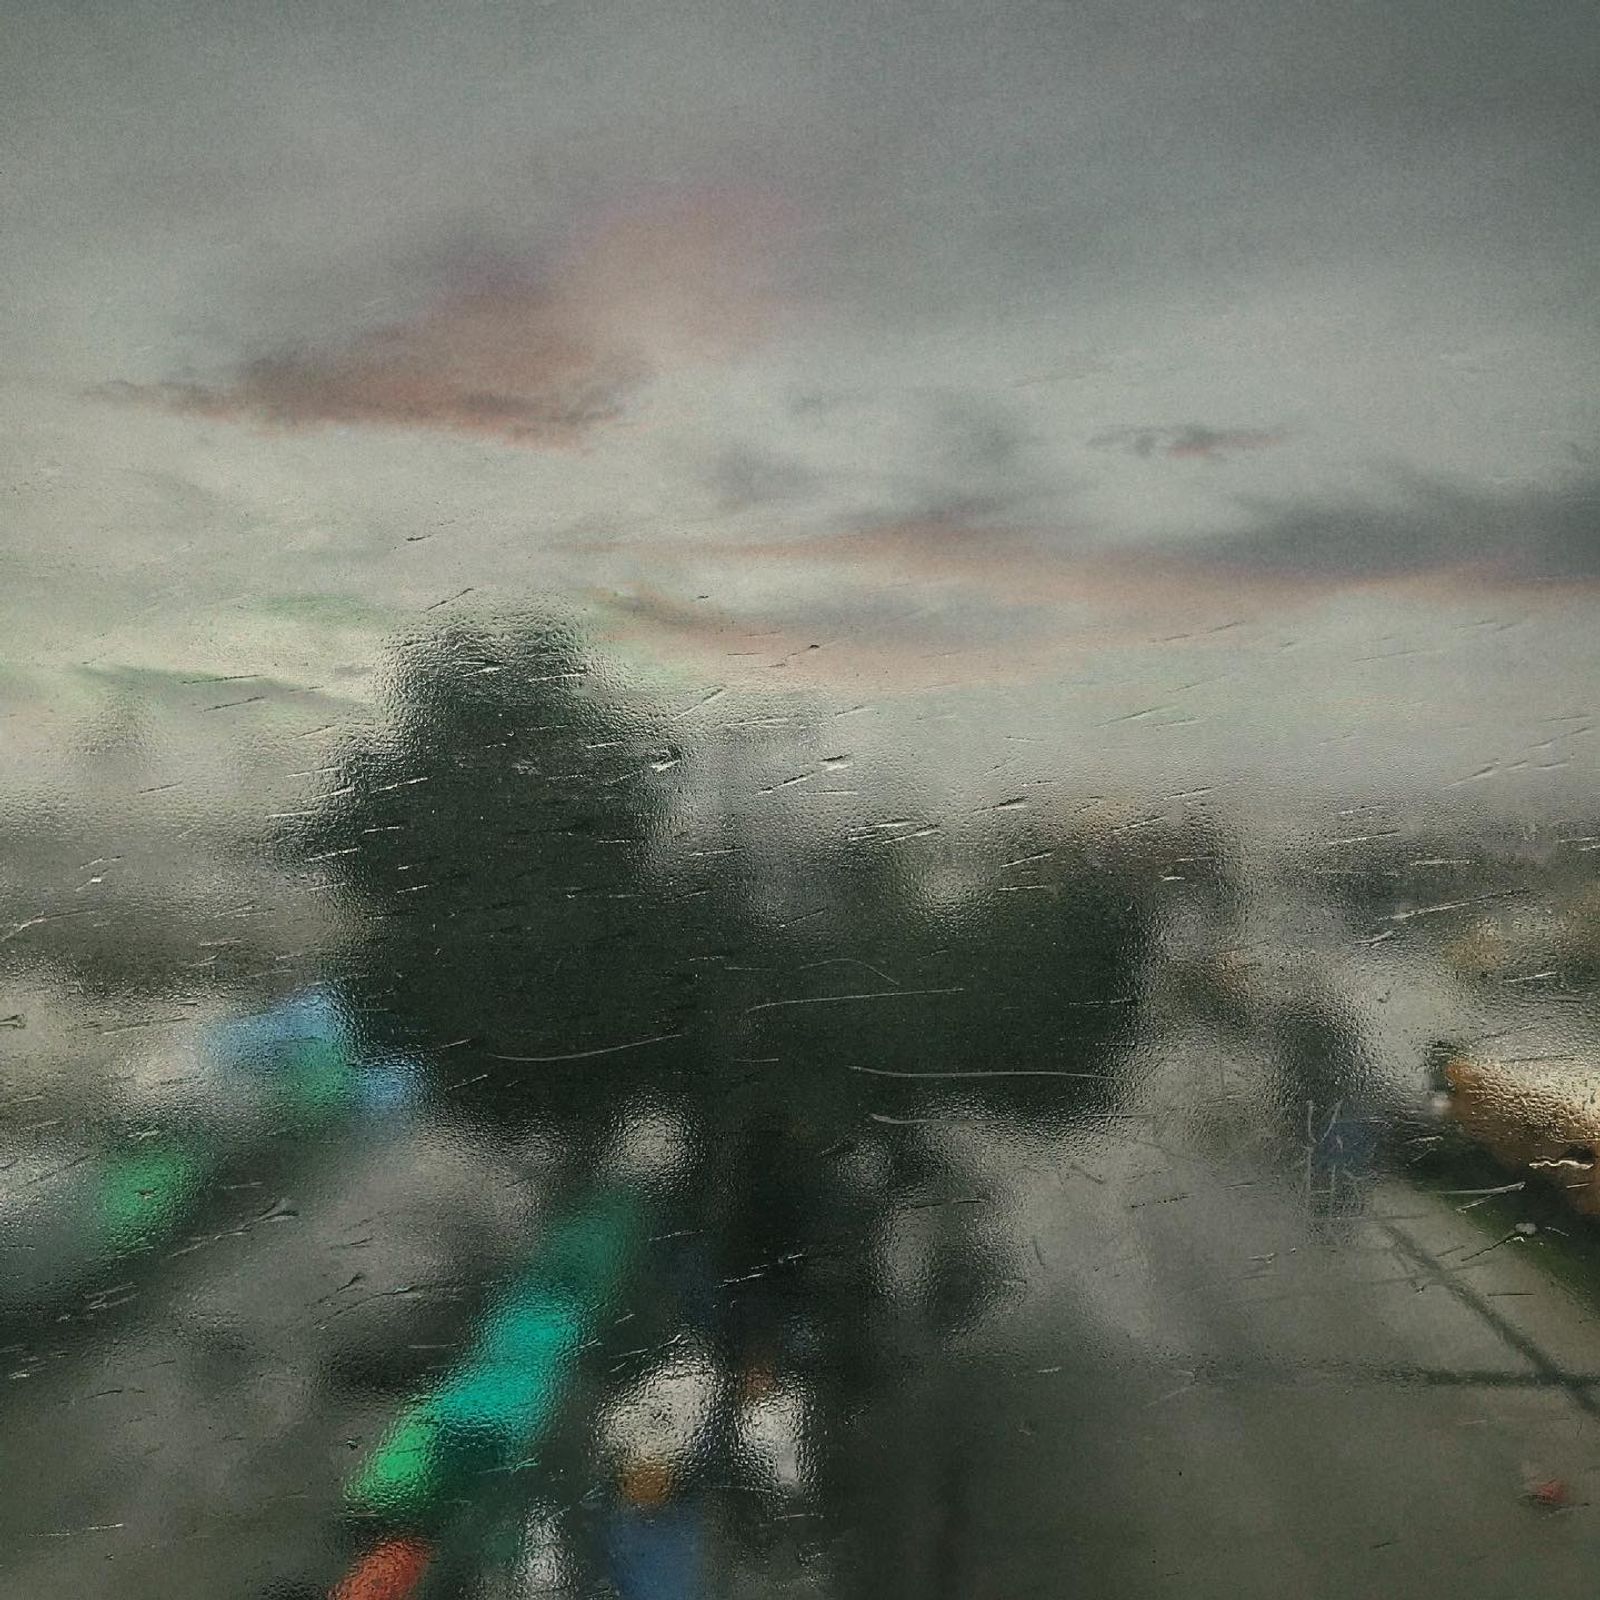 © Tirdad Aghakhani - Image from the Rain photography project